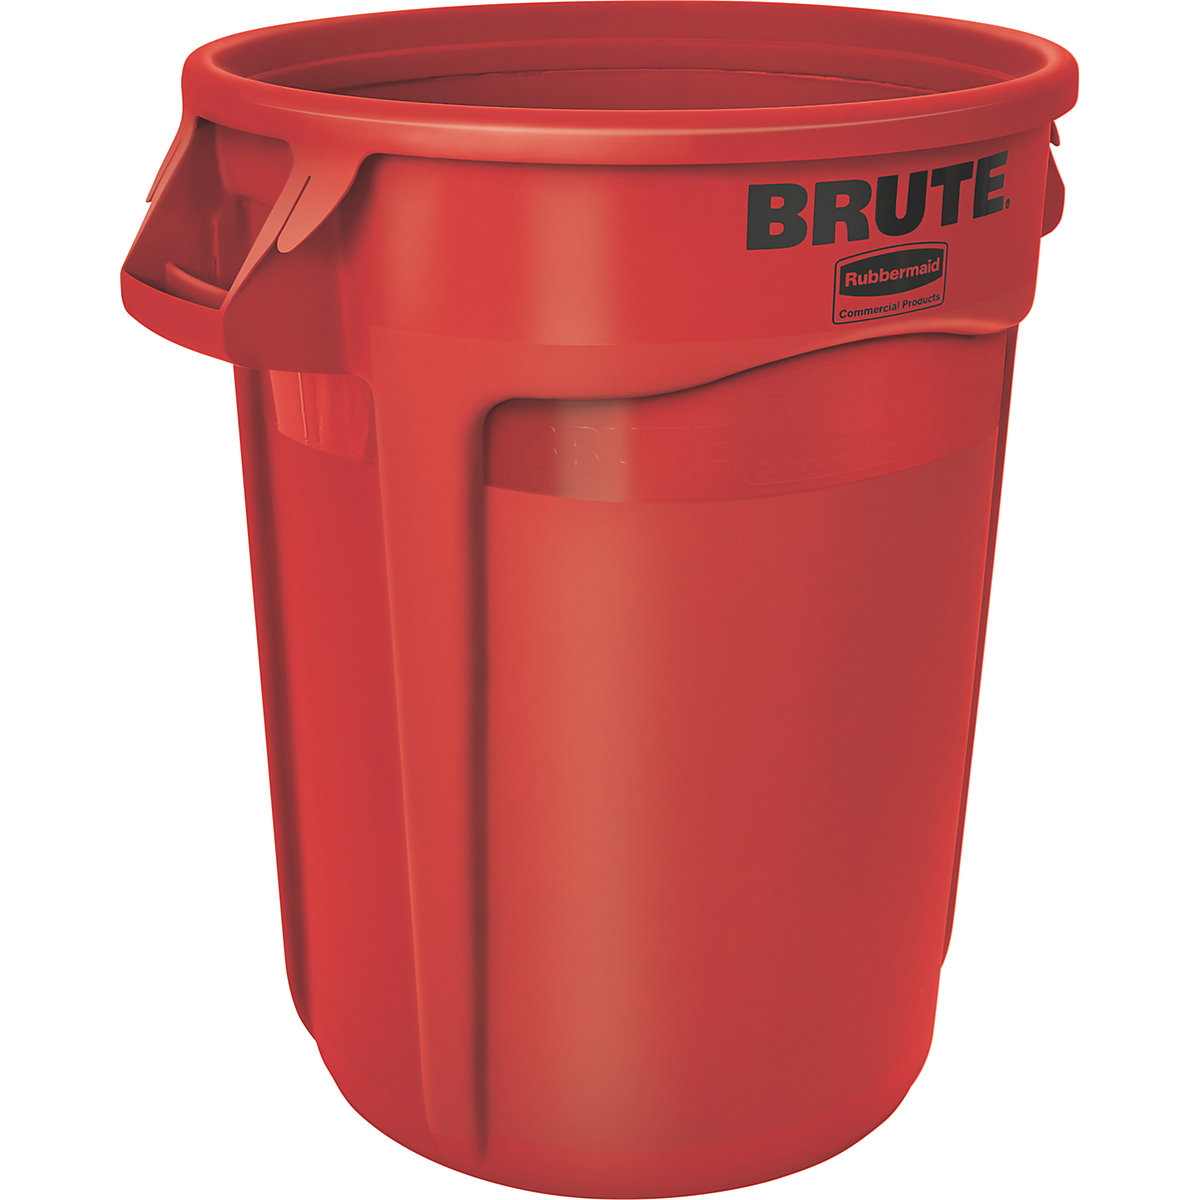 BRUTE® universal container, round – Rubbermaid, capacity 121 l, red-16